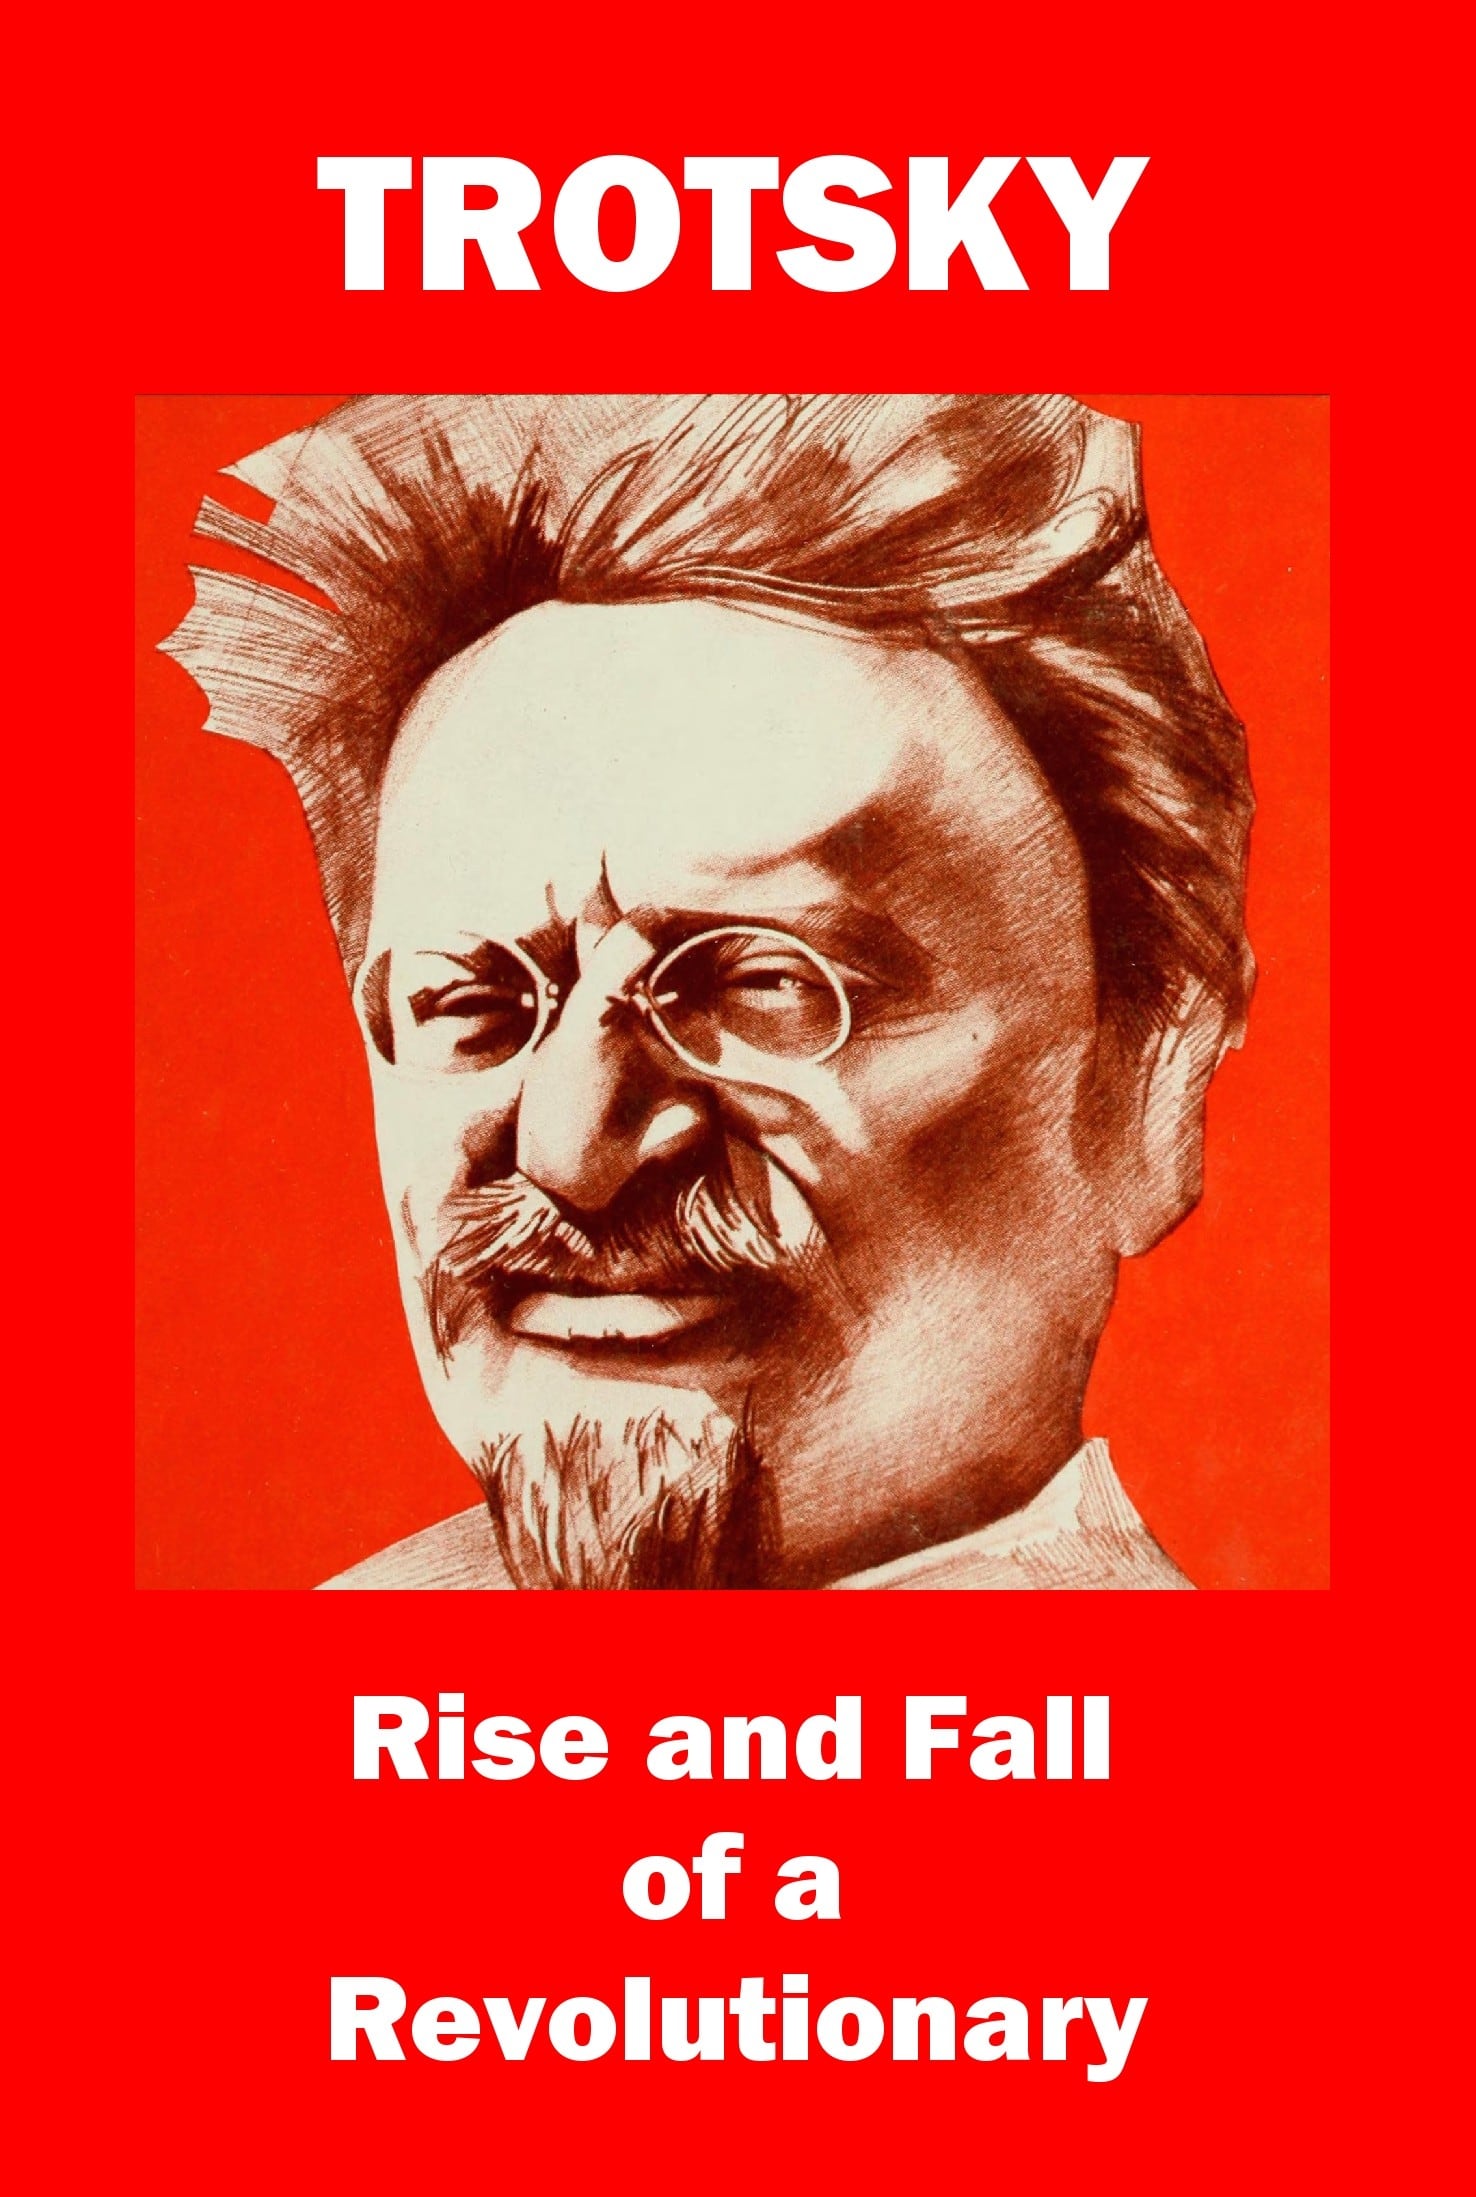 TROTSKY, RISE AND FALL OF A REVOLUTIONARY